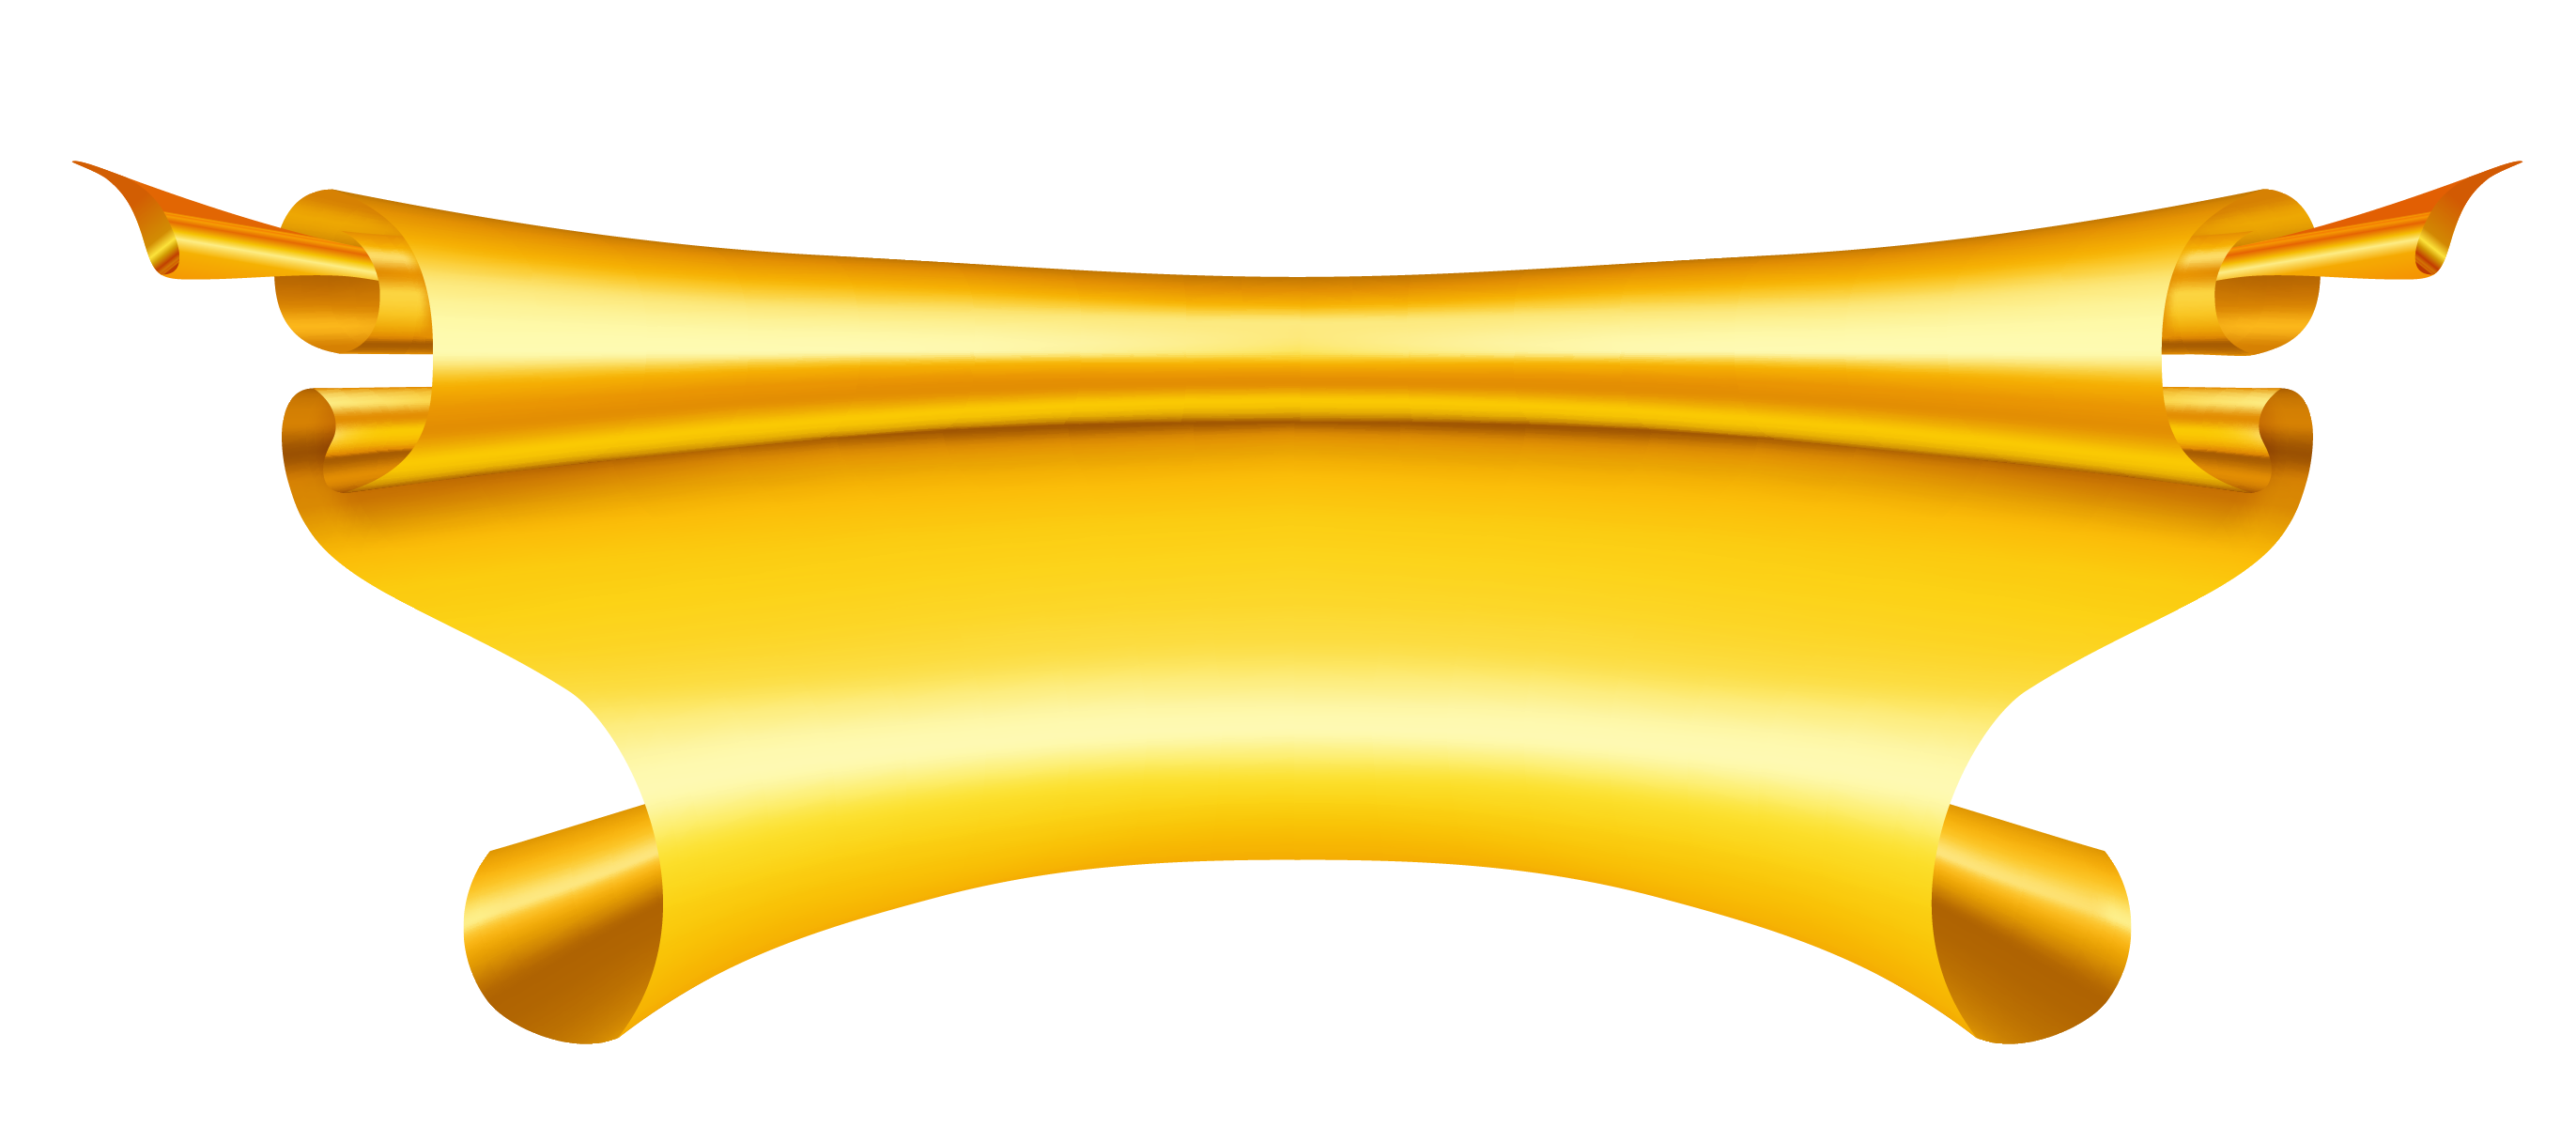 Gold_Banner_Clipart.png?m=1399672800